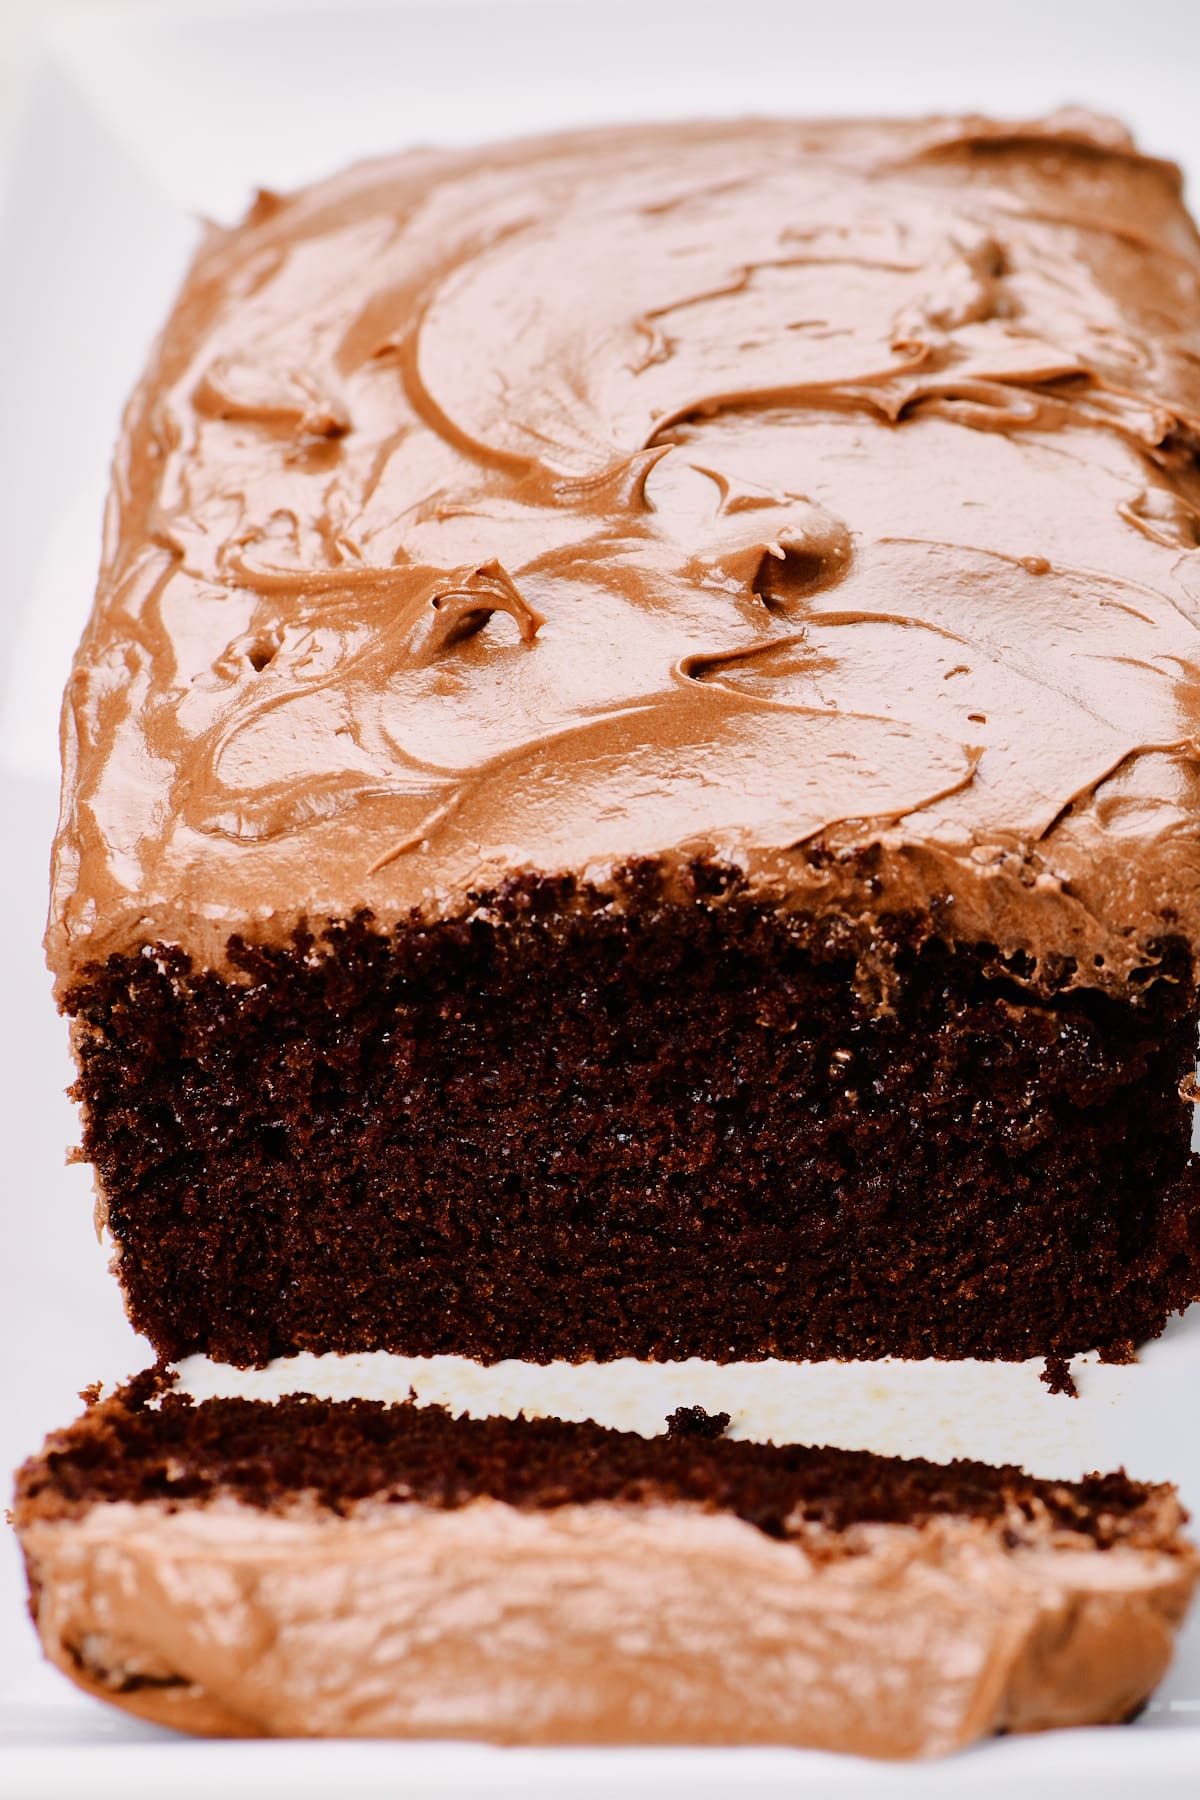 Chocolate loaf cake with chocolate frosting on a white platter.